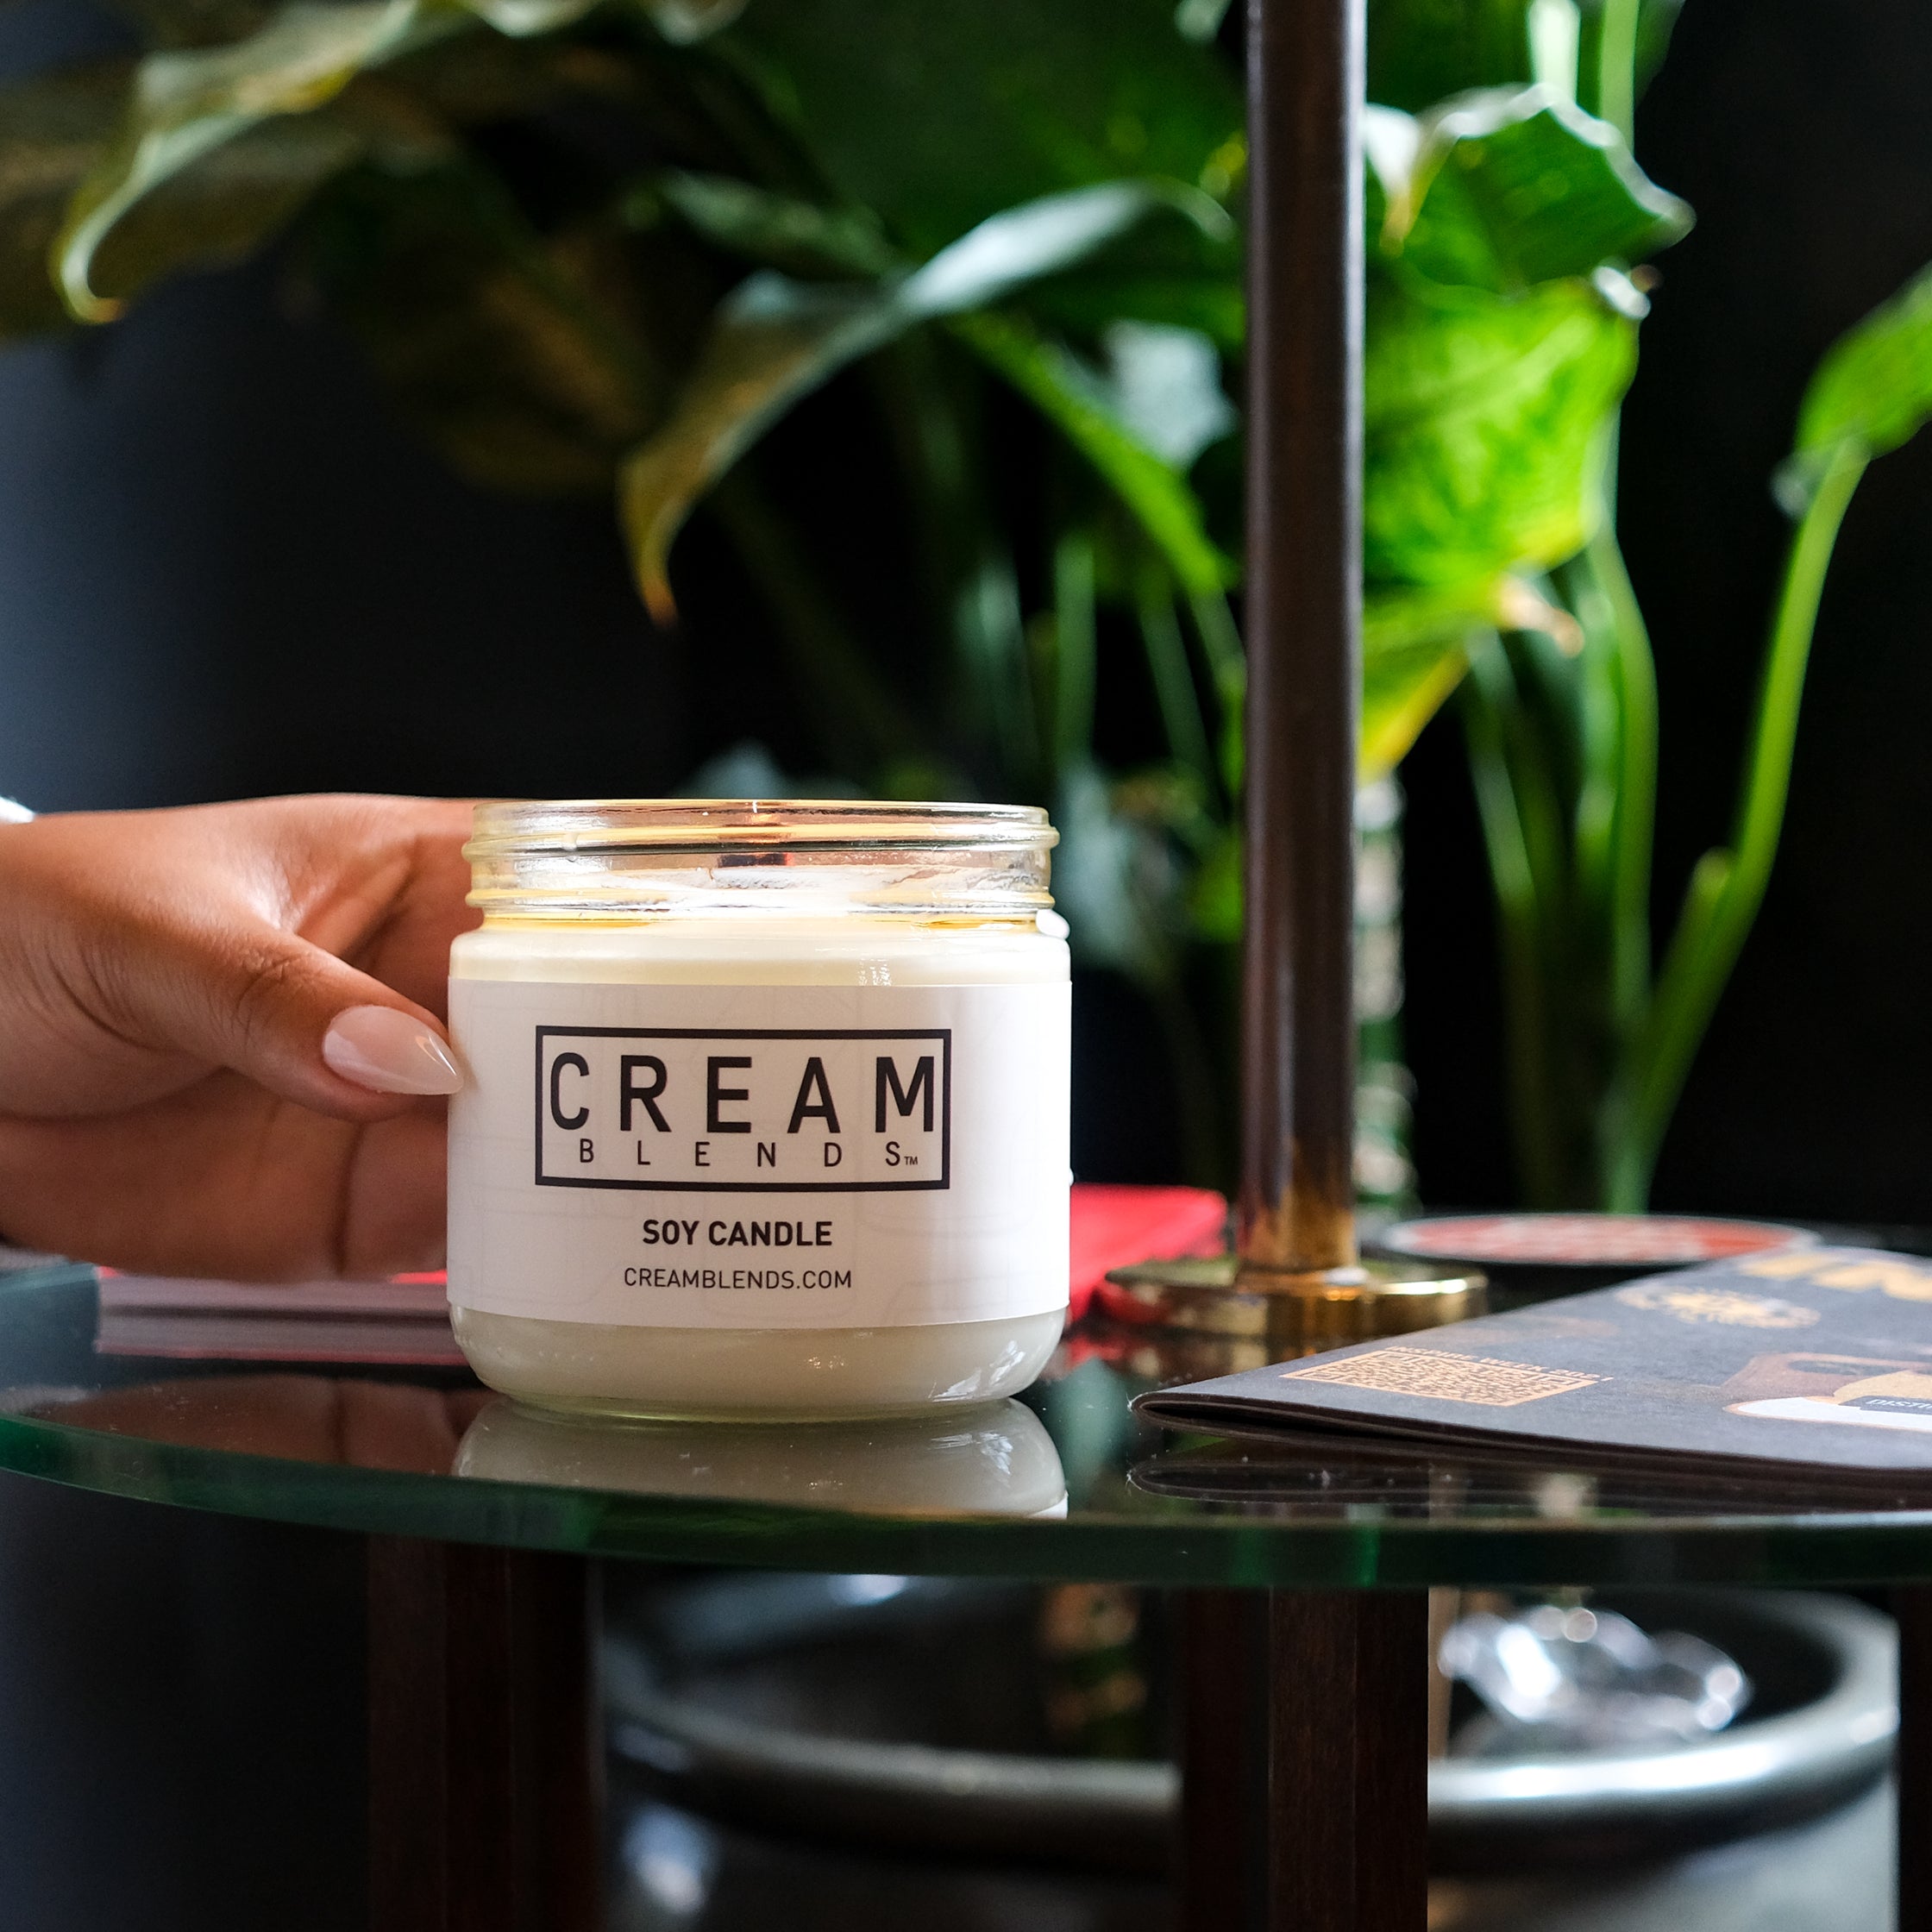 SIMPLE SKINCARE MADE WITH REAL INGREDIENTS BY REAL PEOPLE — CREAM BLENDS